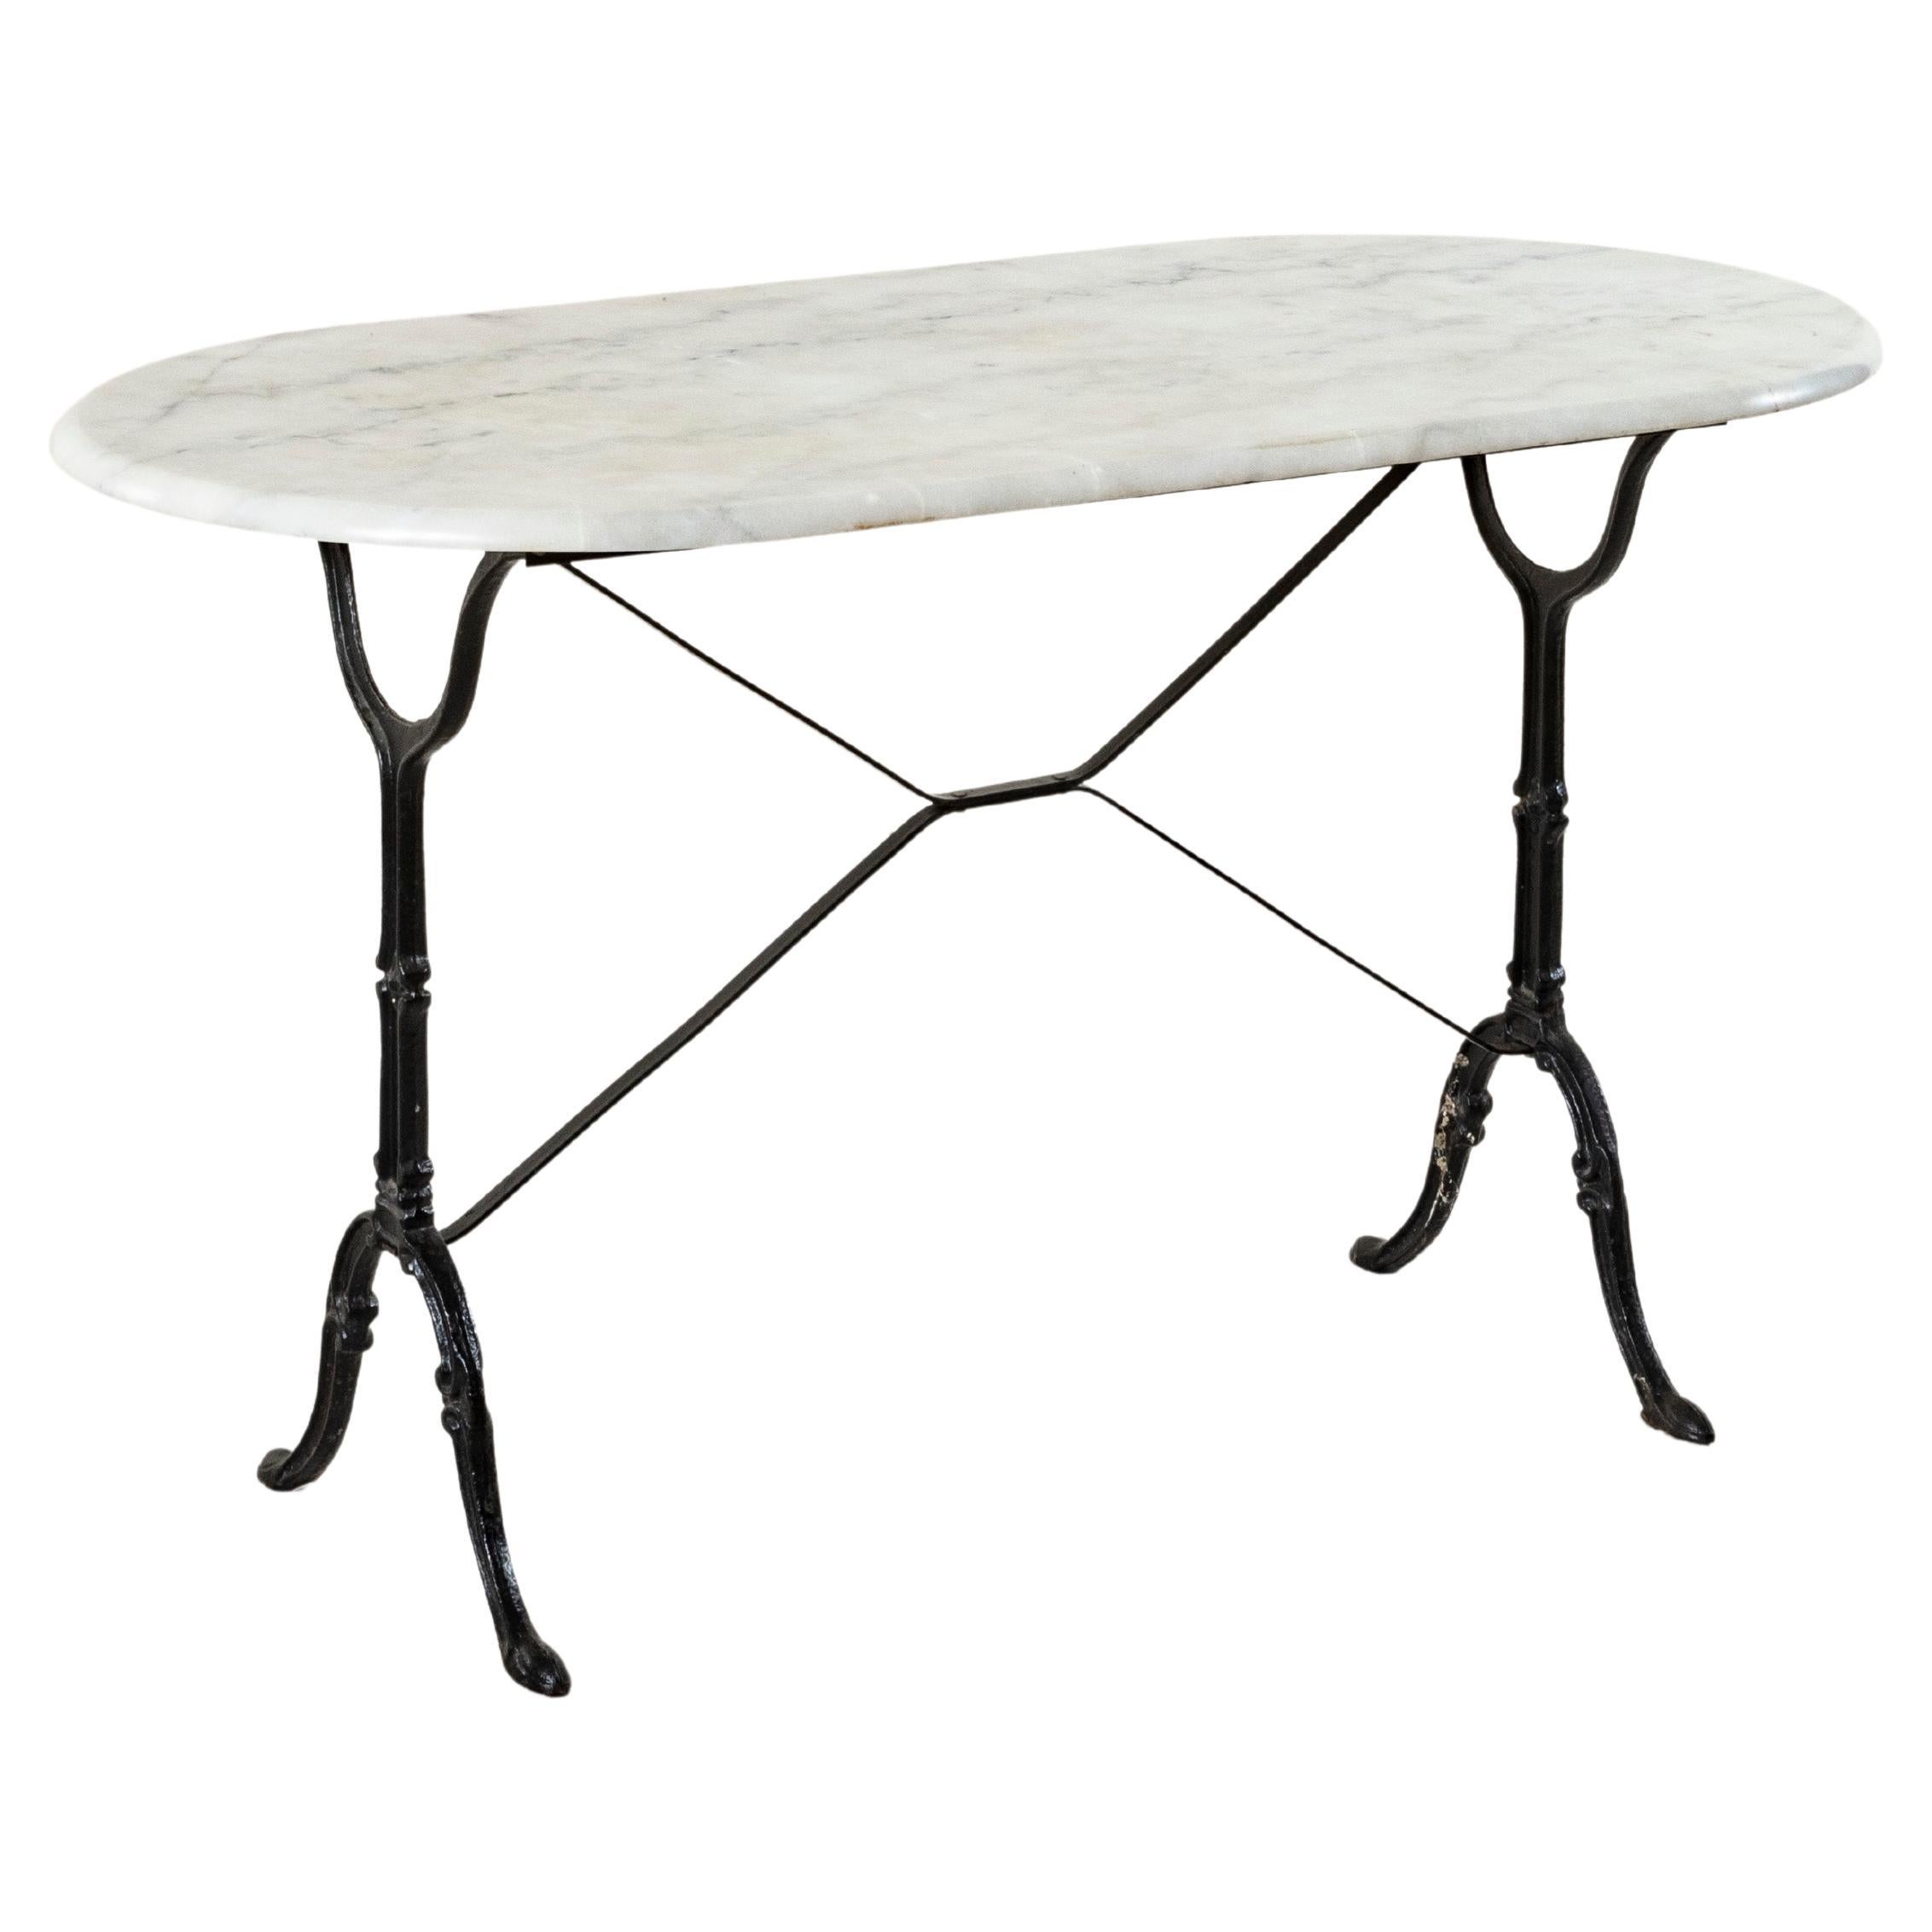 Mid-20th Century French Cast Iron and Oval Marble Bistro Table or Cafe Table